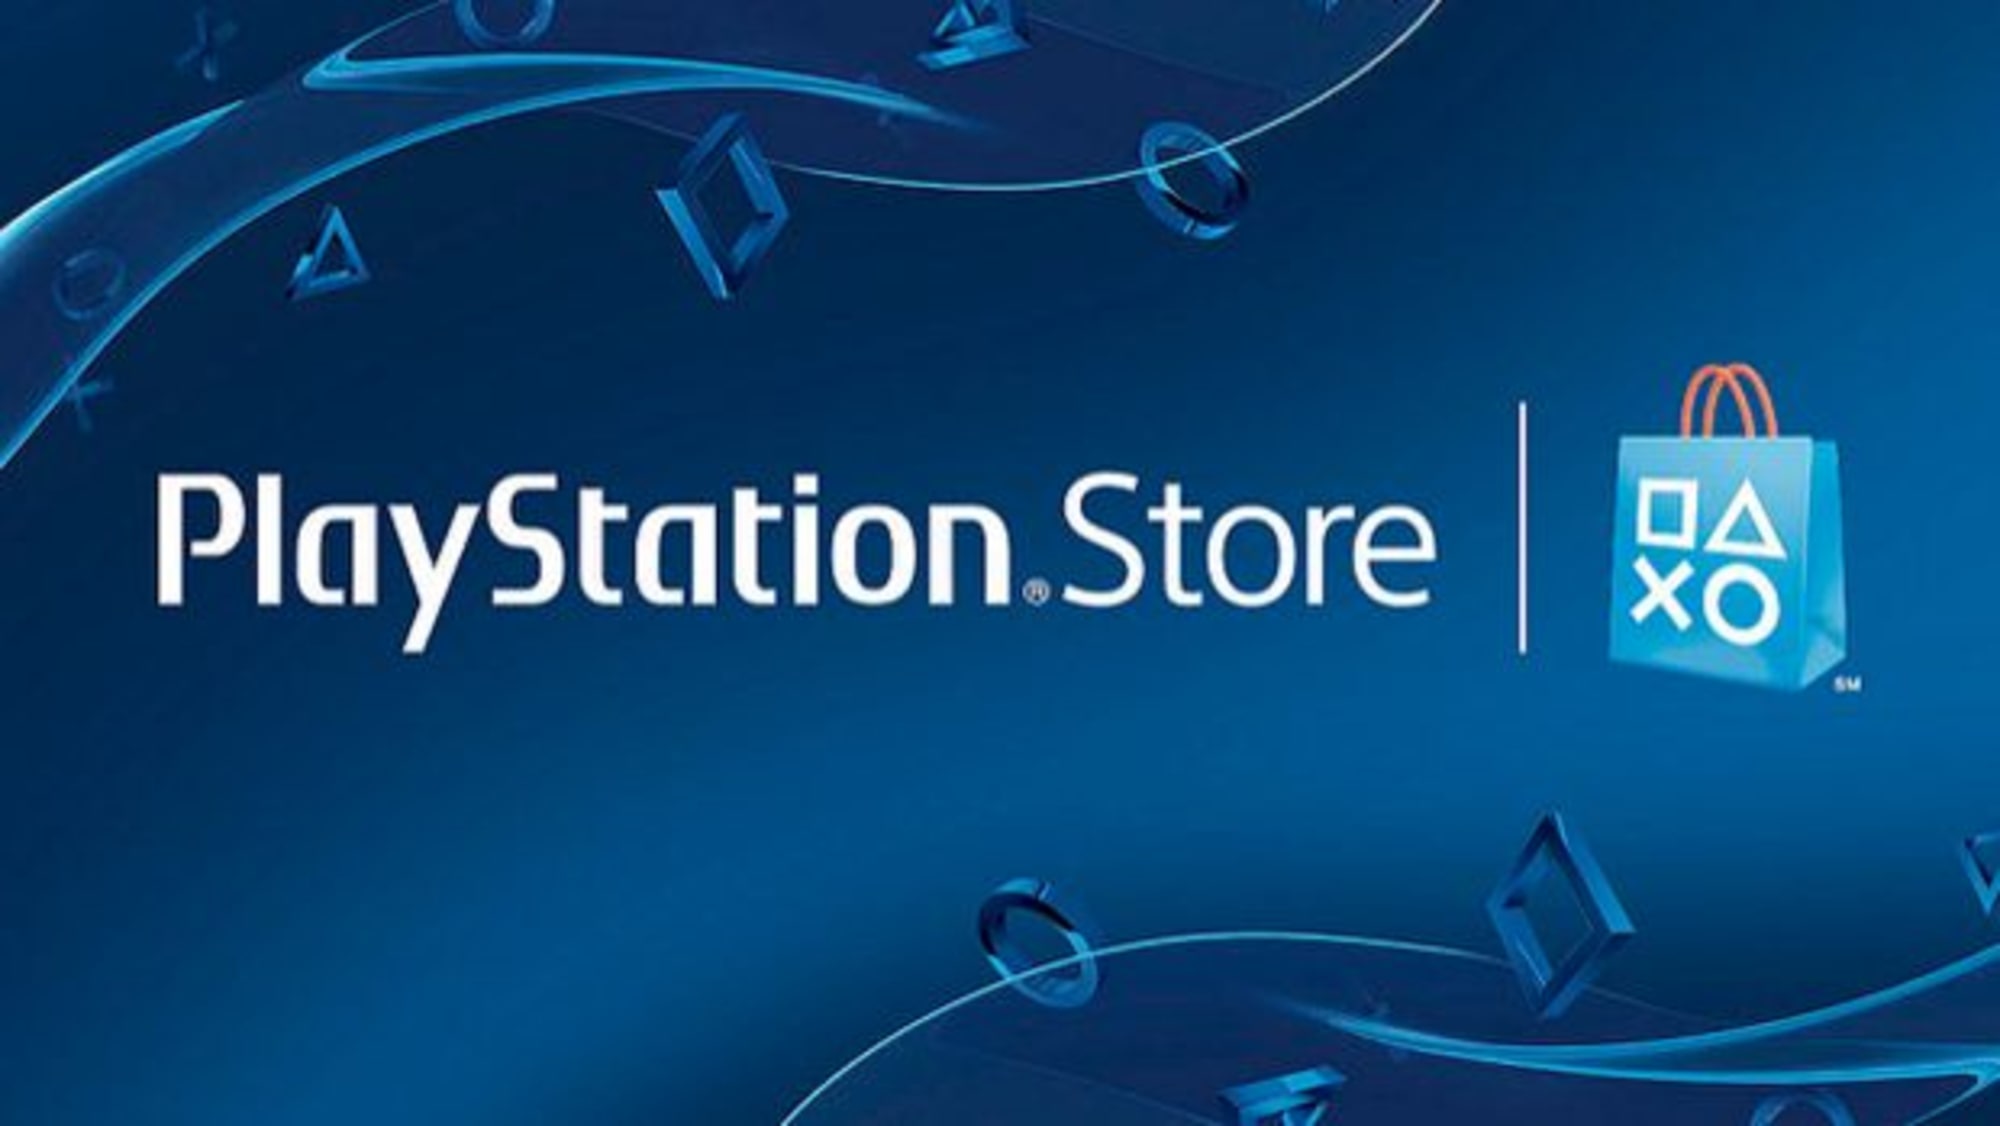 Ps4 store турция. PLAYSTATION Store. Турецкий PLAYSTATION Store. Магазин плейстейшен. PS Sony PLAYSTATION Store.